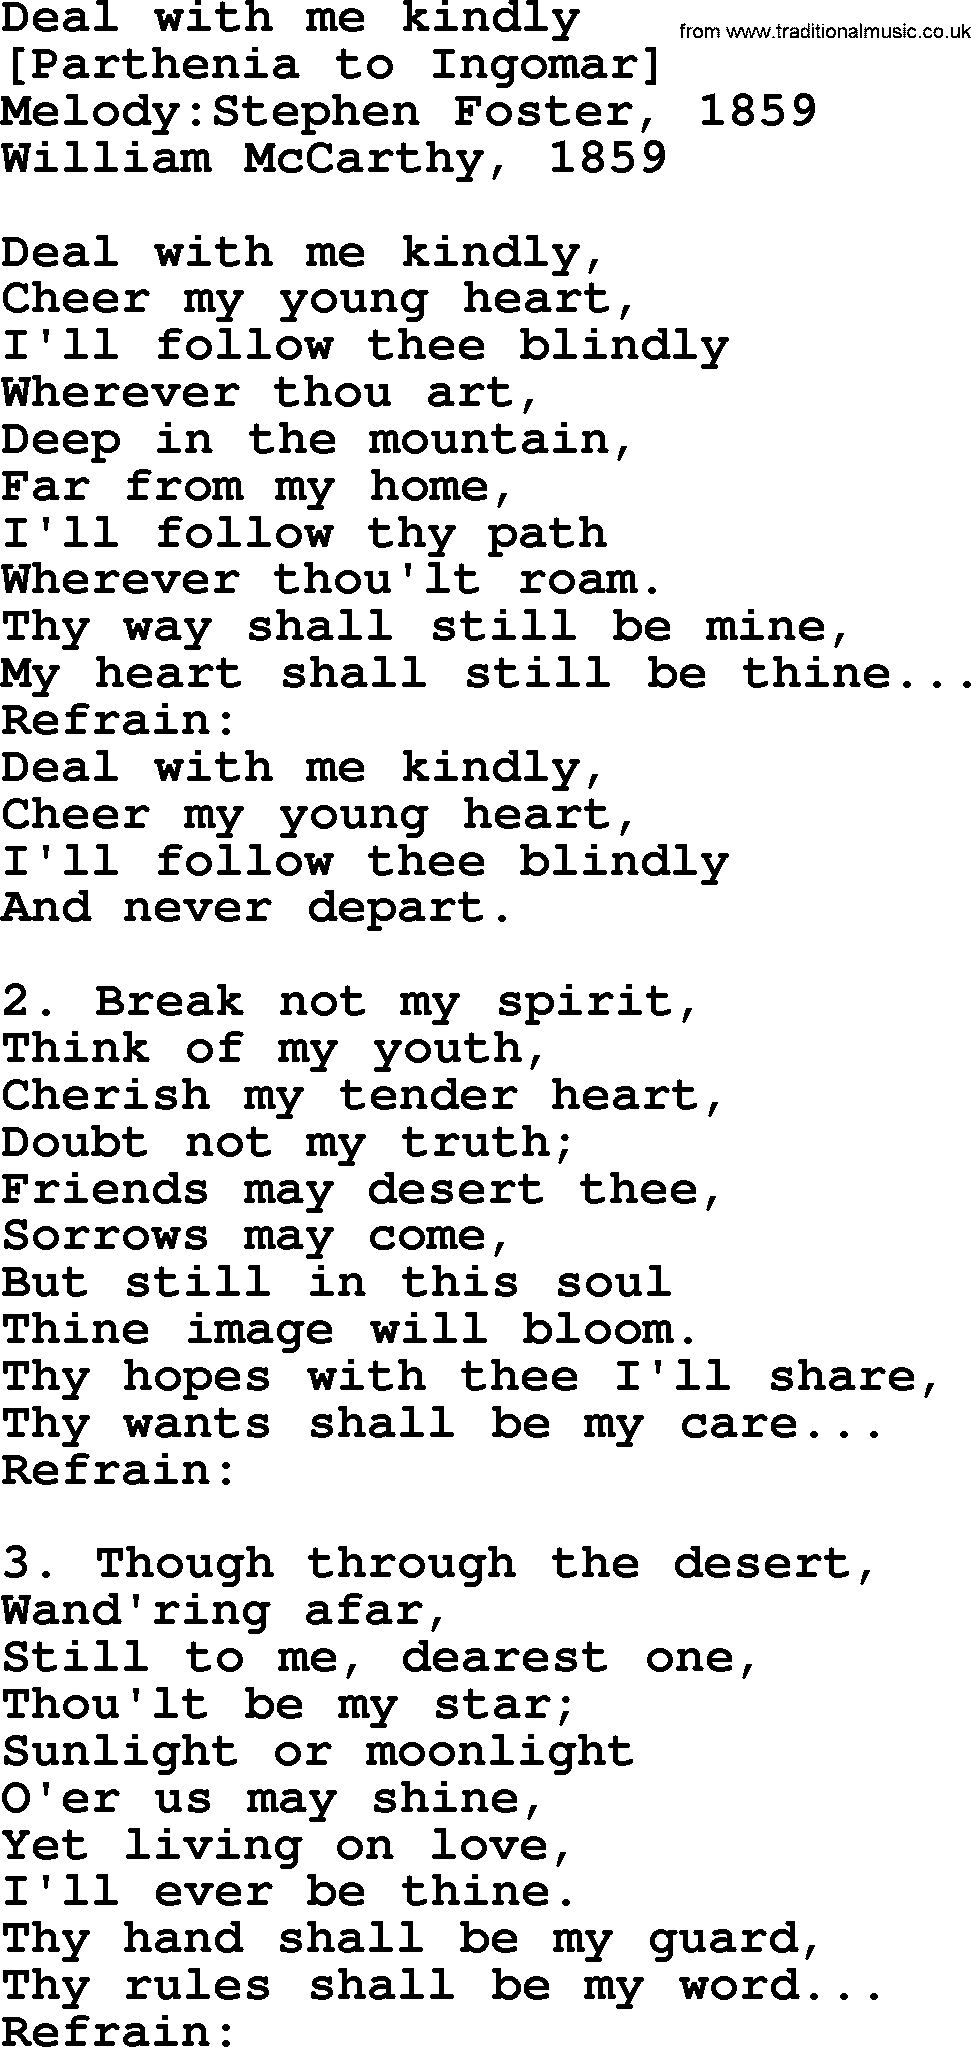 Old American Song: Deal With Me Kindly, lyrics